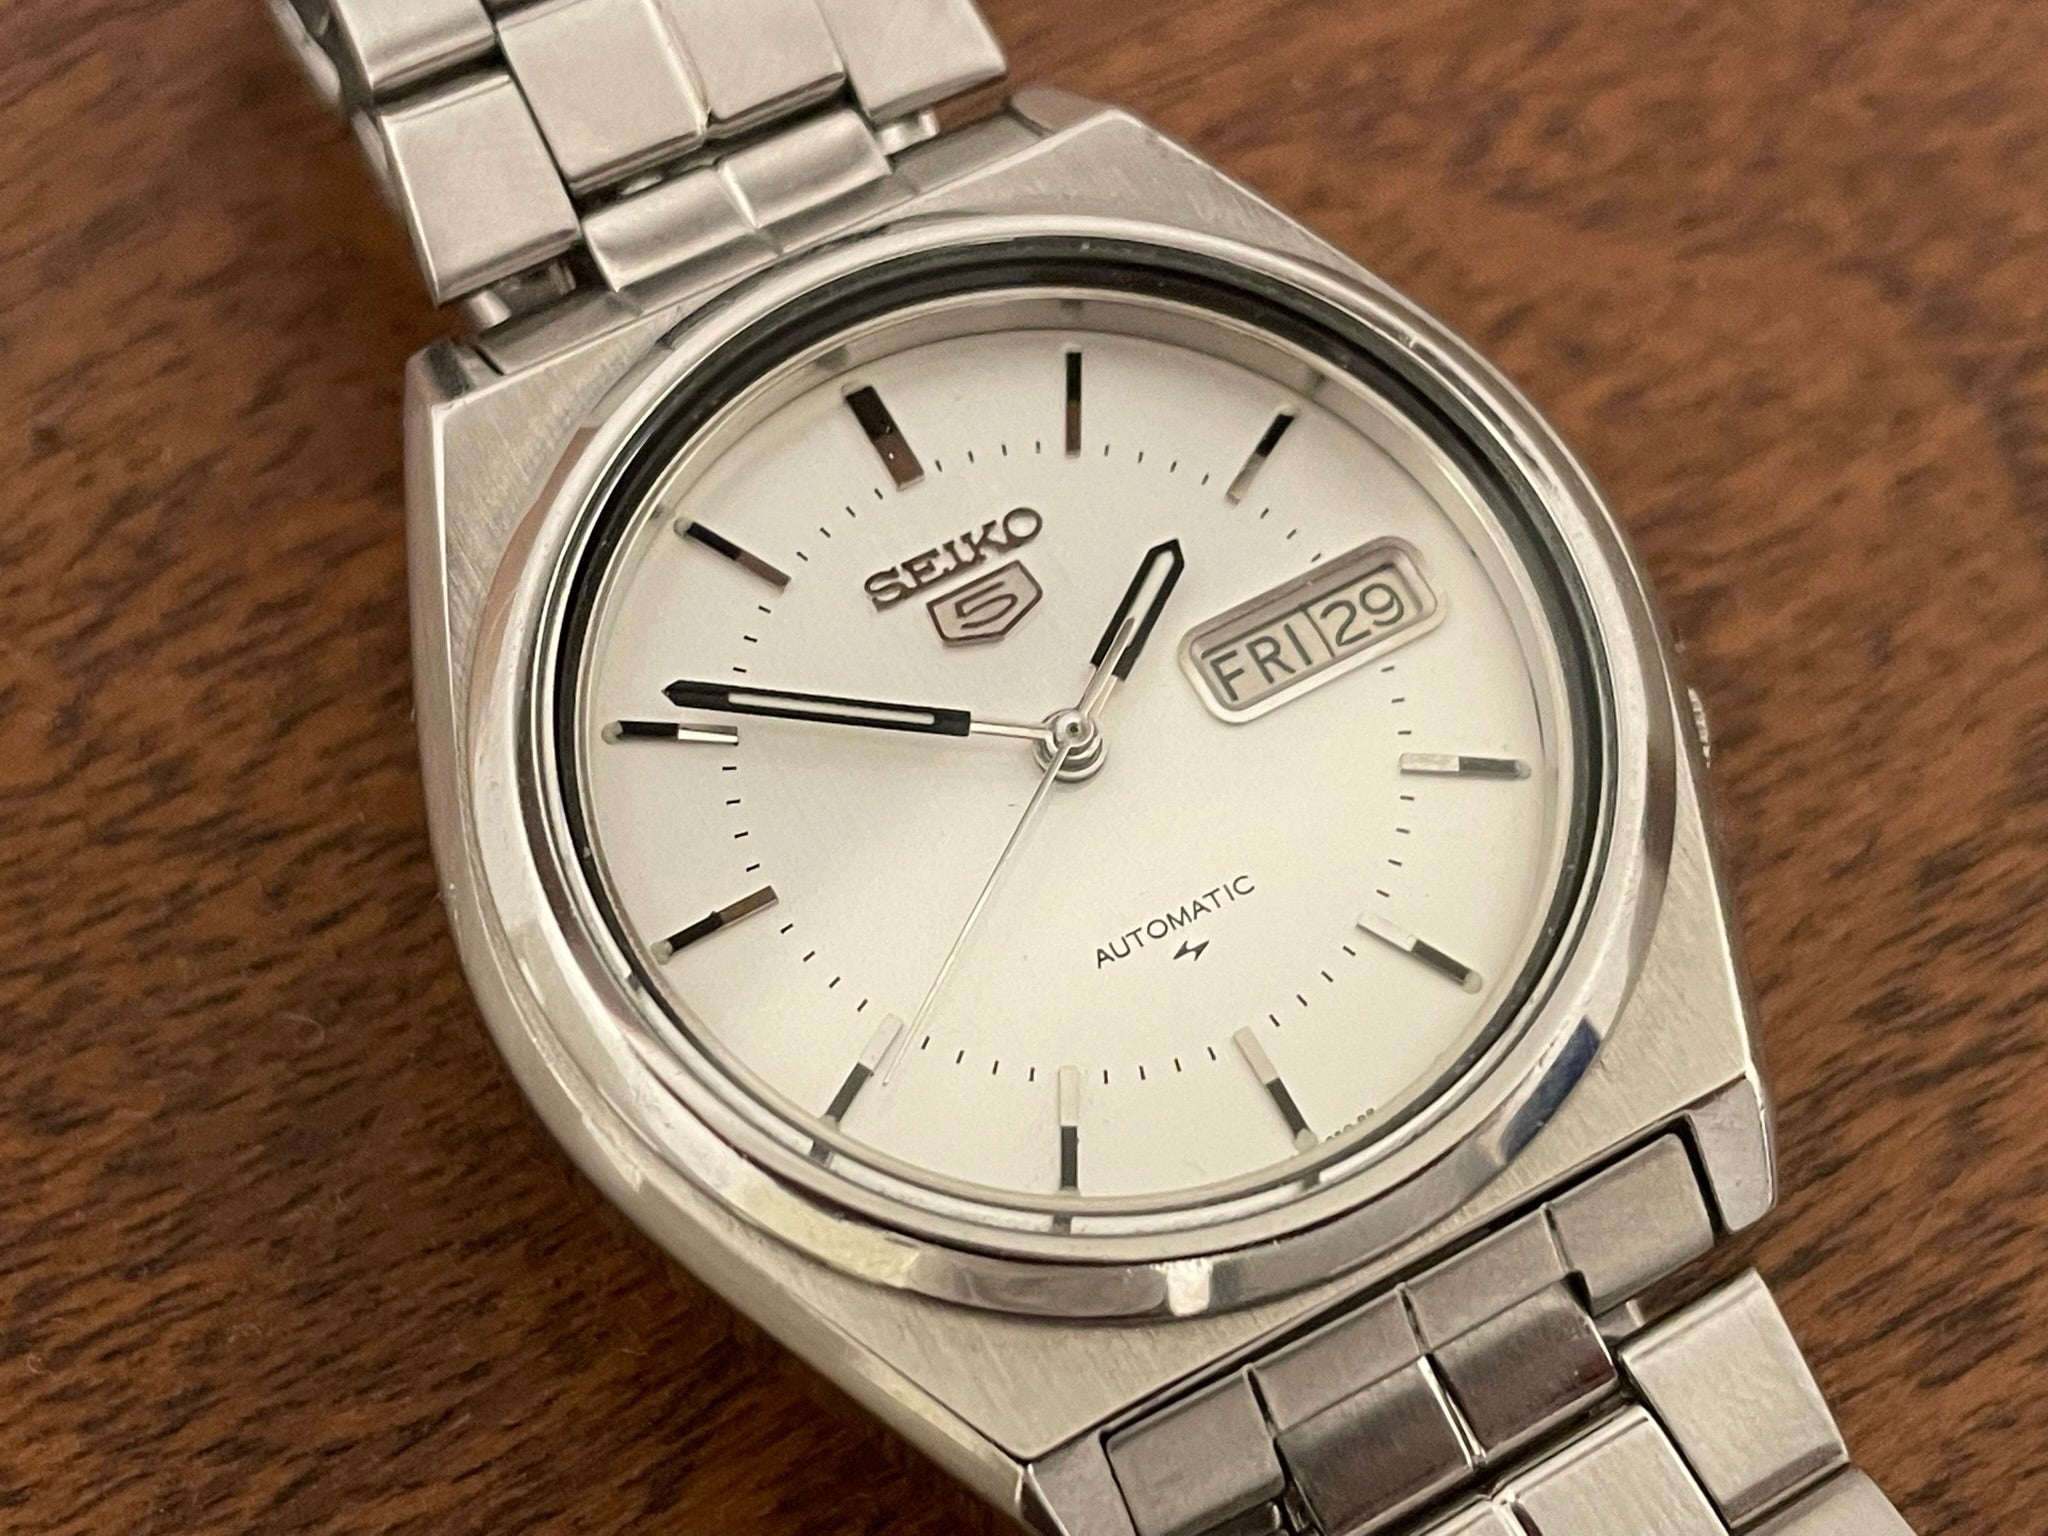 1983) Seiko 5 Automatic 7009-876A day/date automatic (full service 